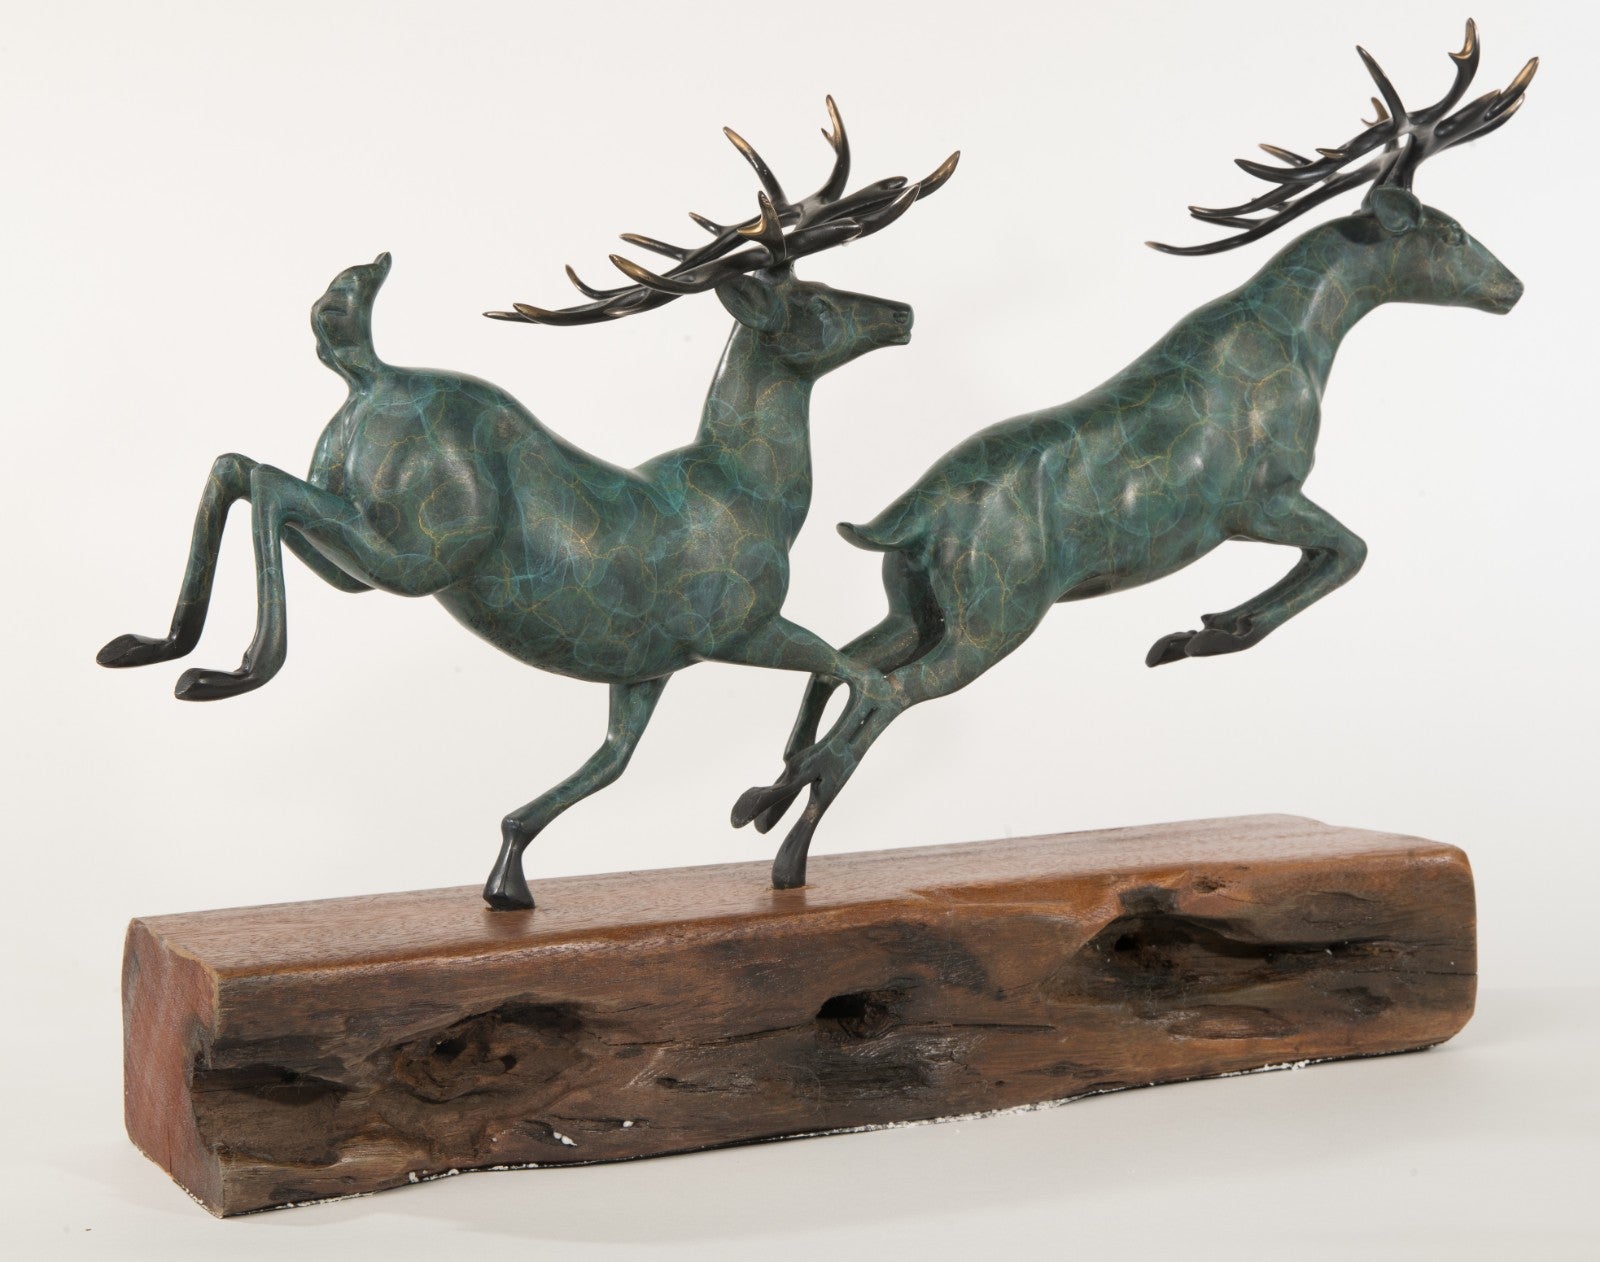 AWESOME BRONZE RUNNING ELKS SCULPTURE HOT CAST COLLECTOR Wood BASE FIGURINE SALE GIFT